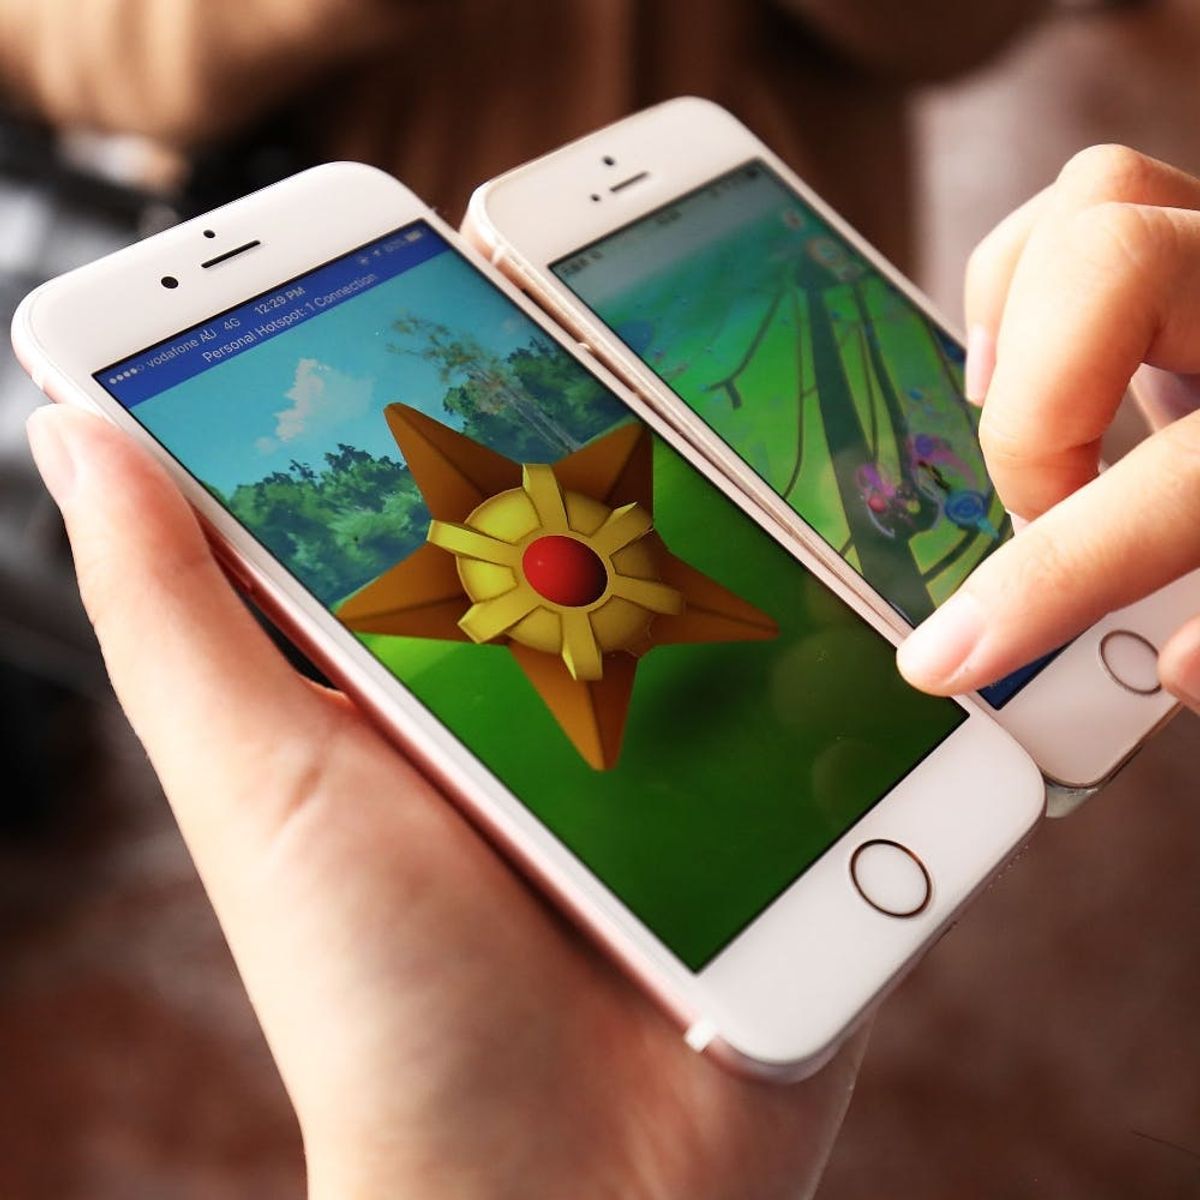 Pokémon Go Creators Are Reportedly Ready to Take On Game of Thrones